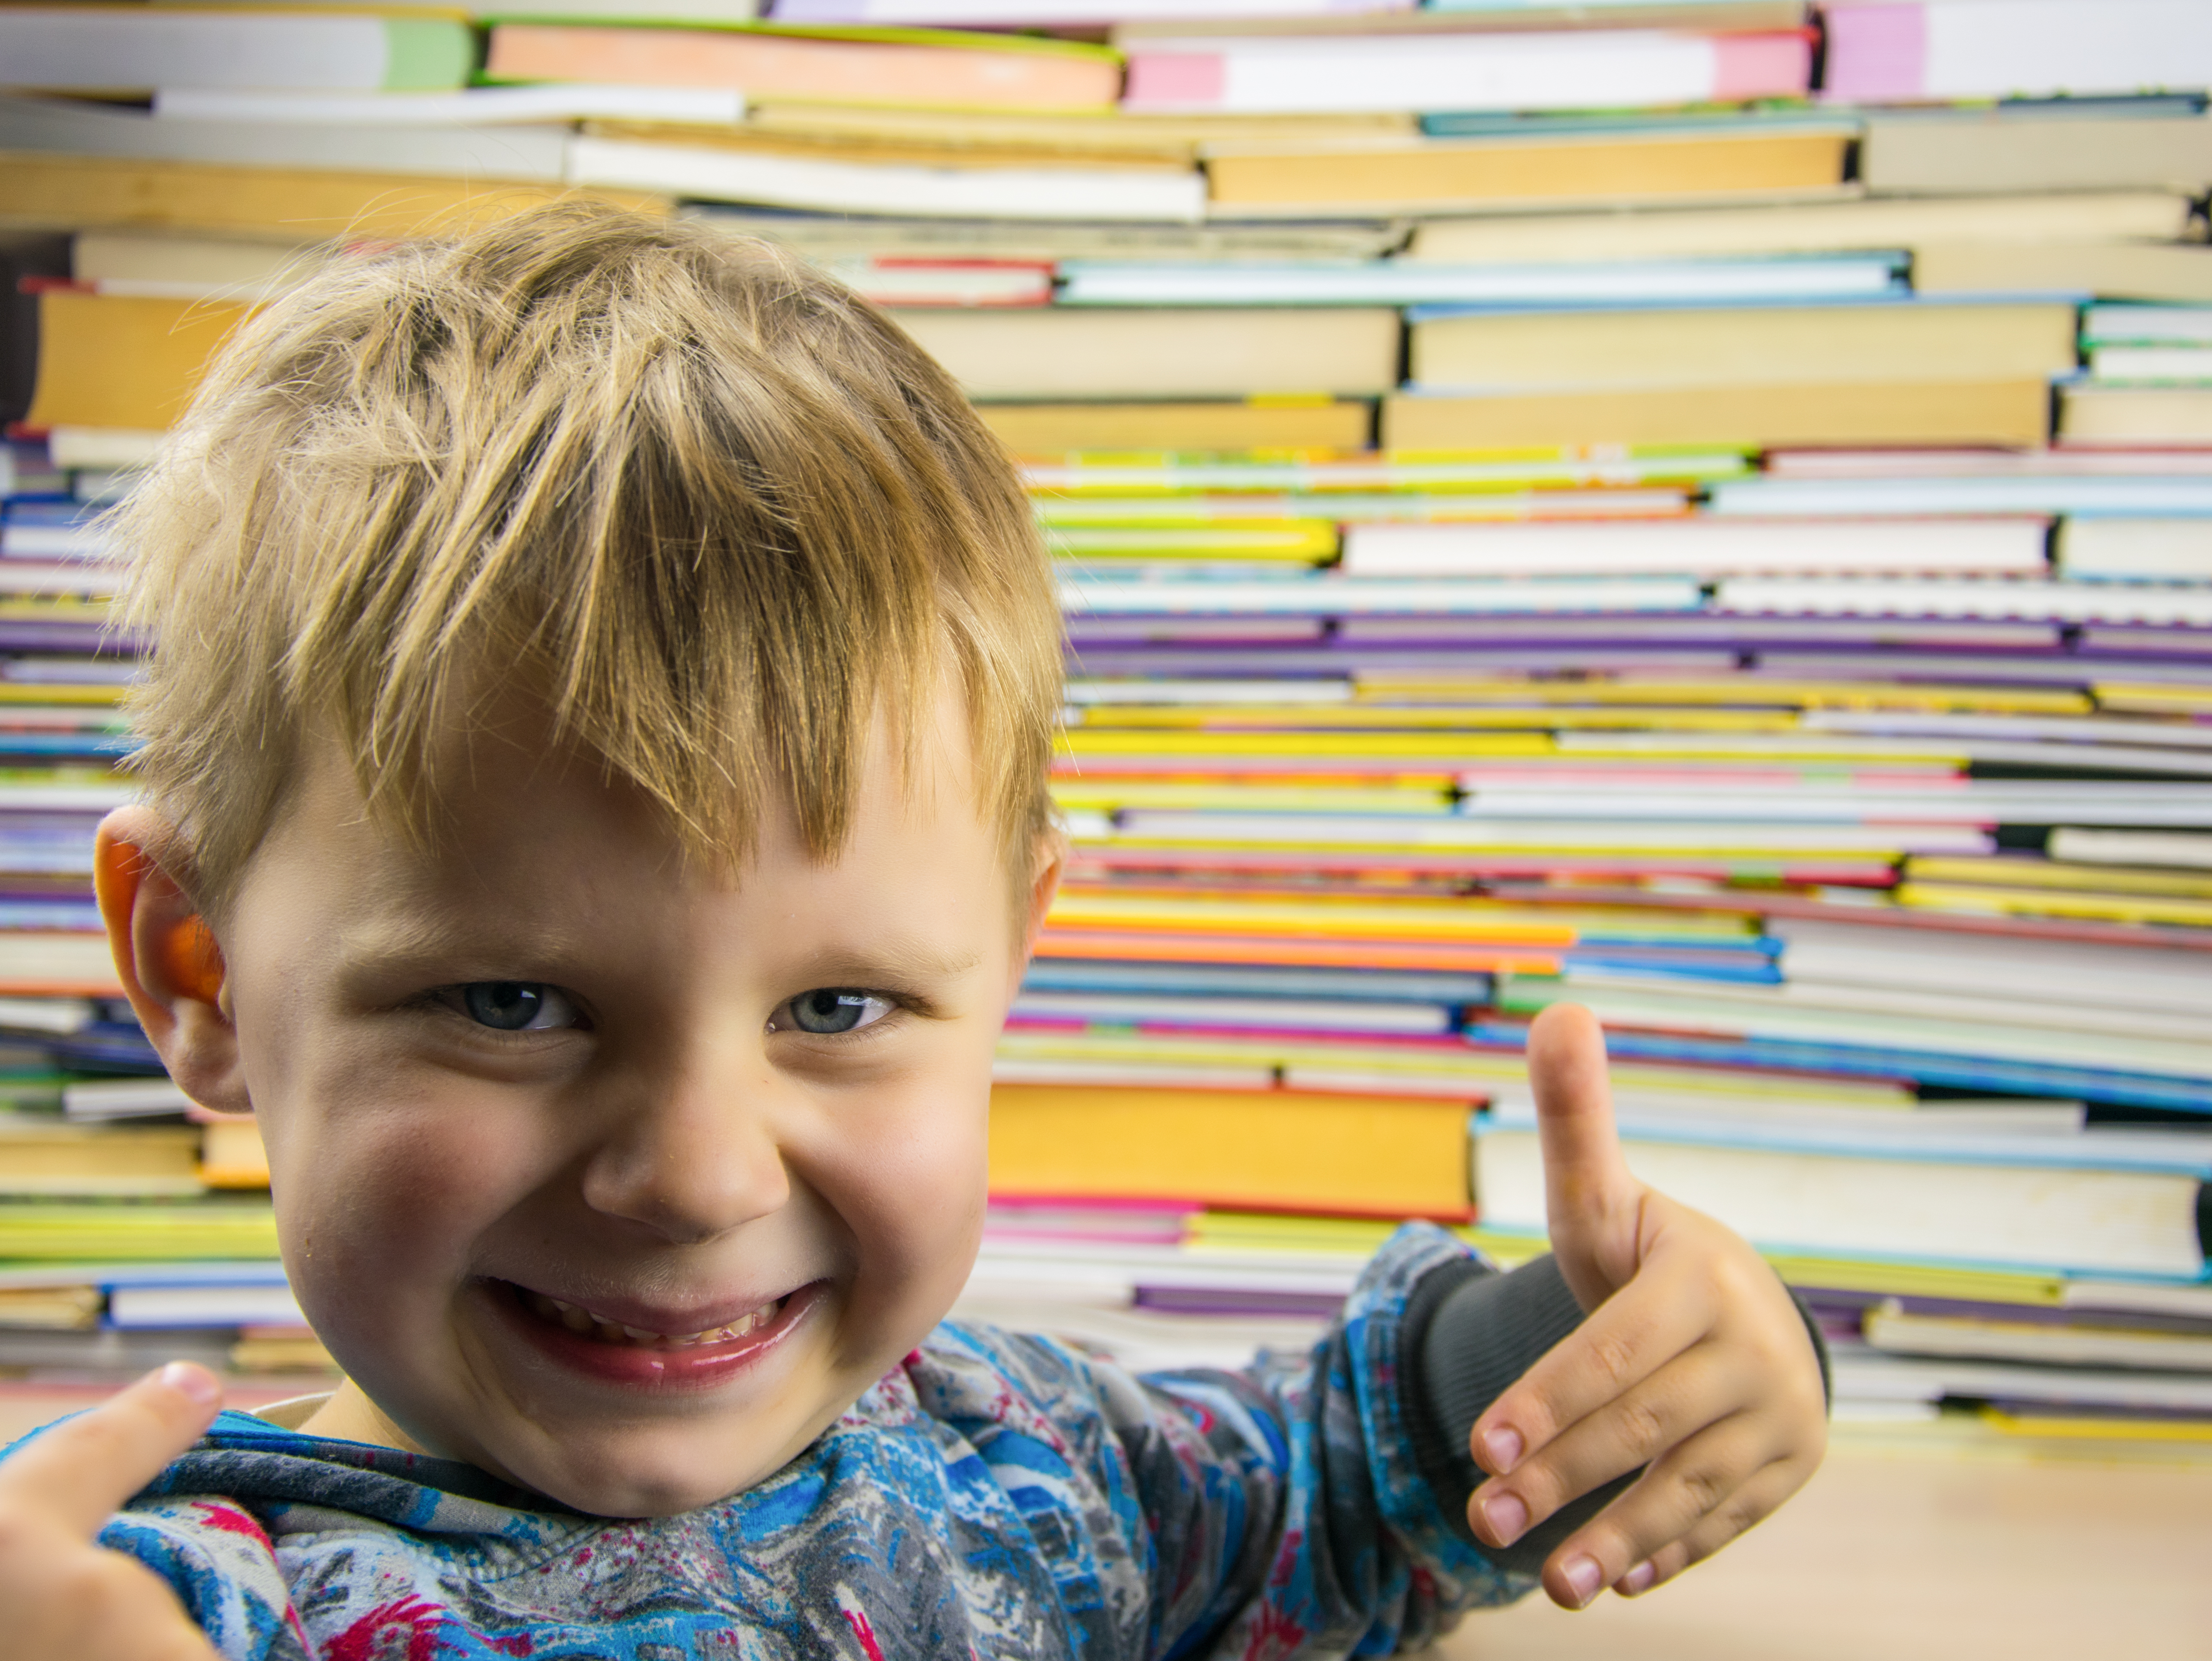 Little boy standing in front of books